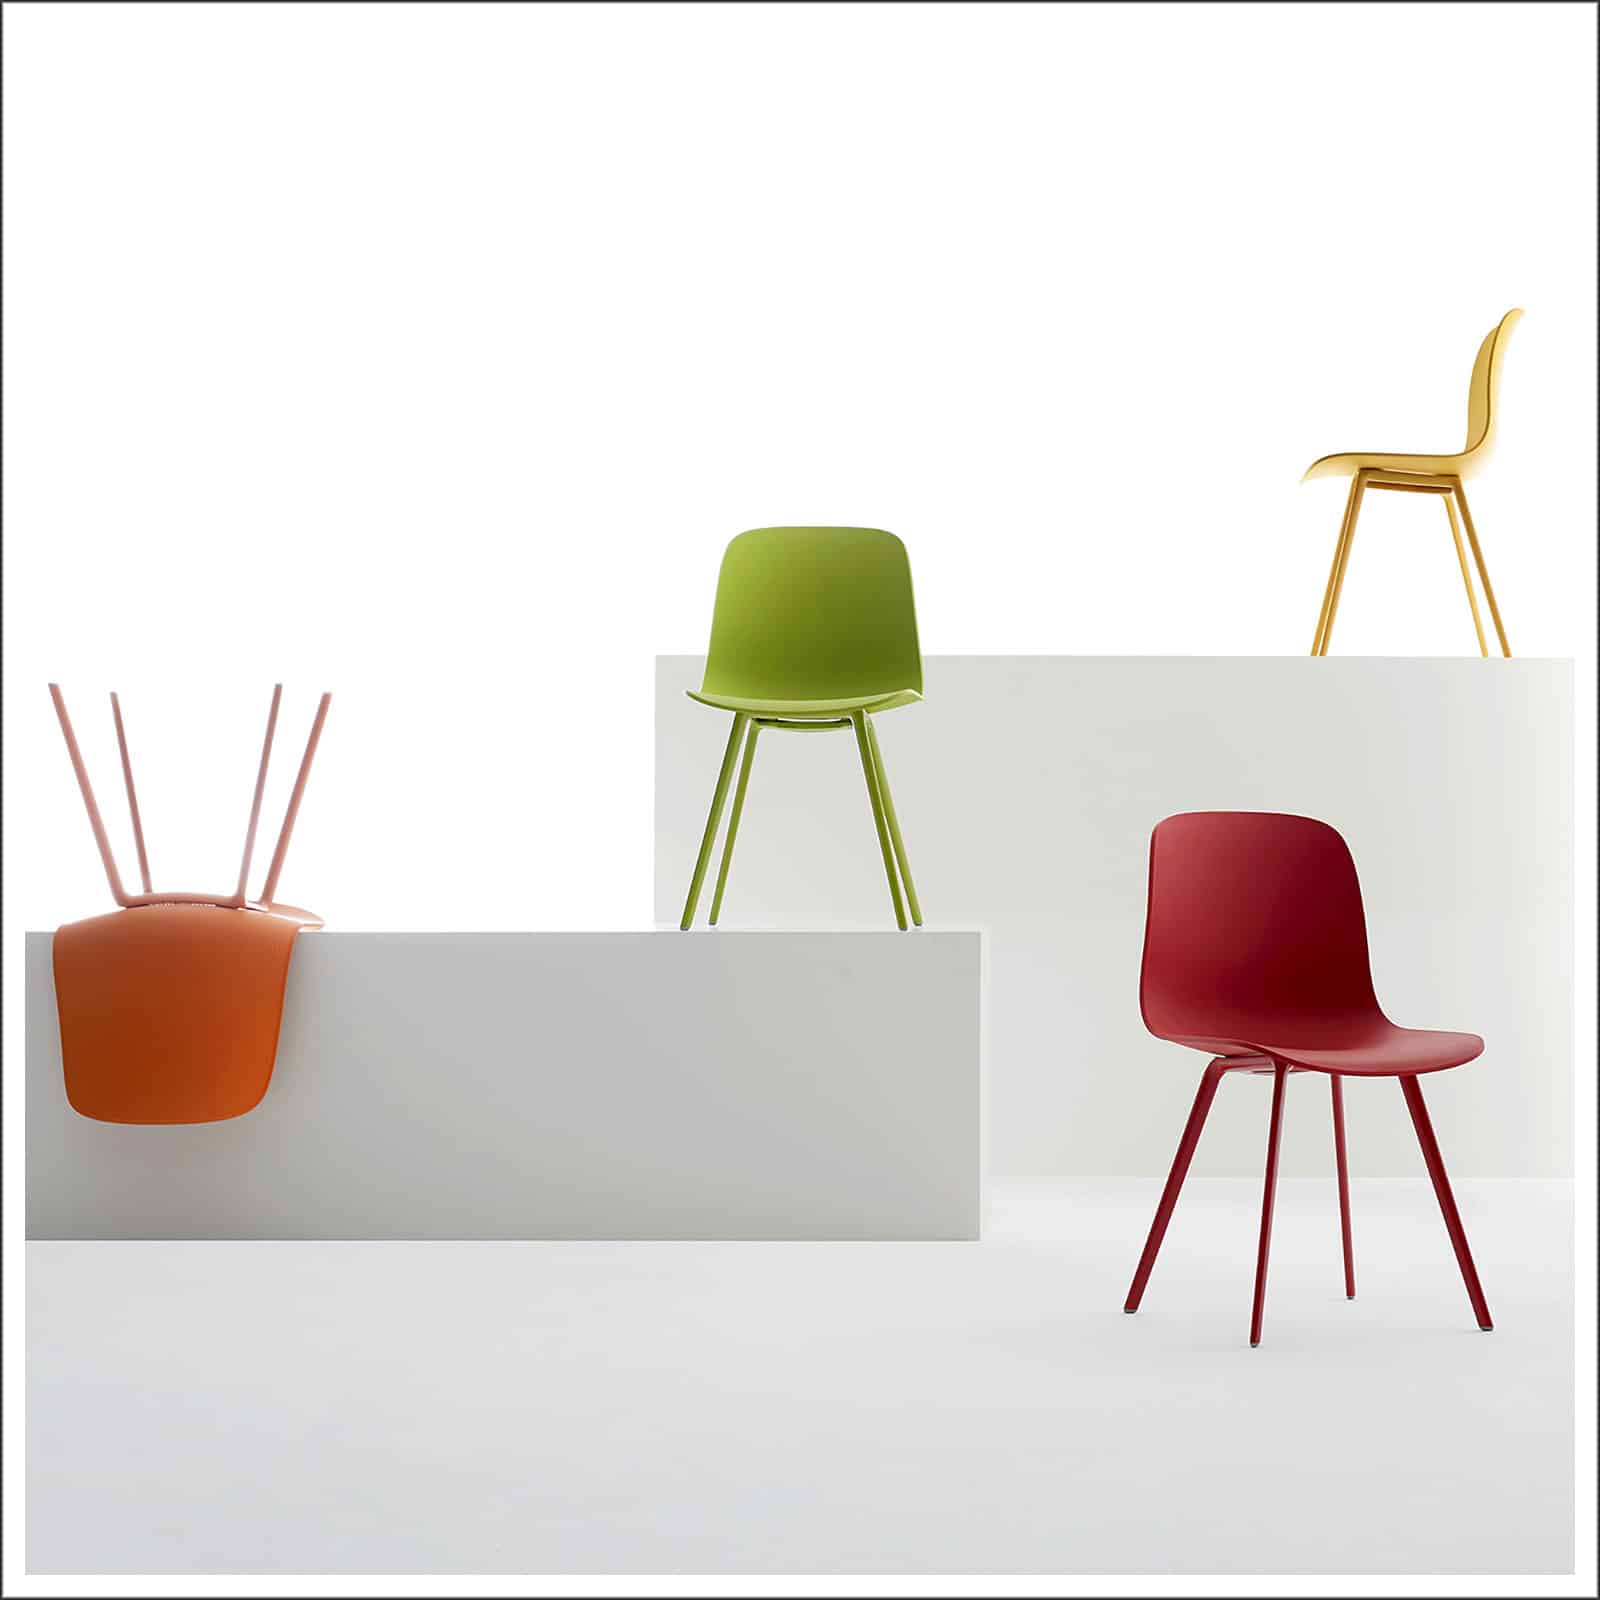 Liven up your break-room with vibrantly colored chairs